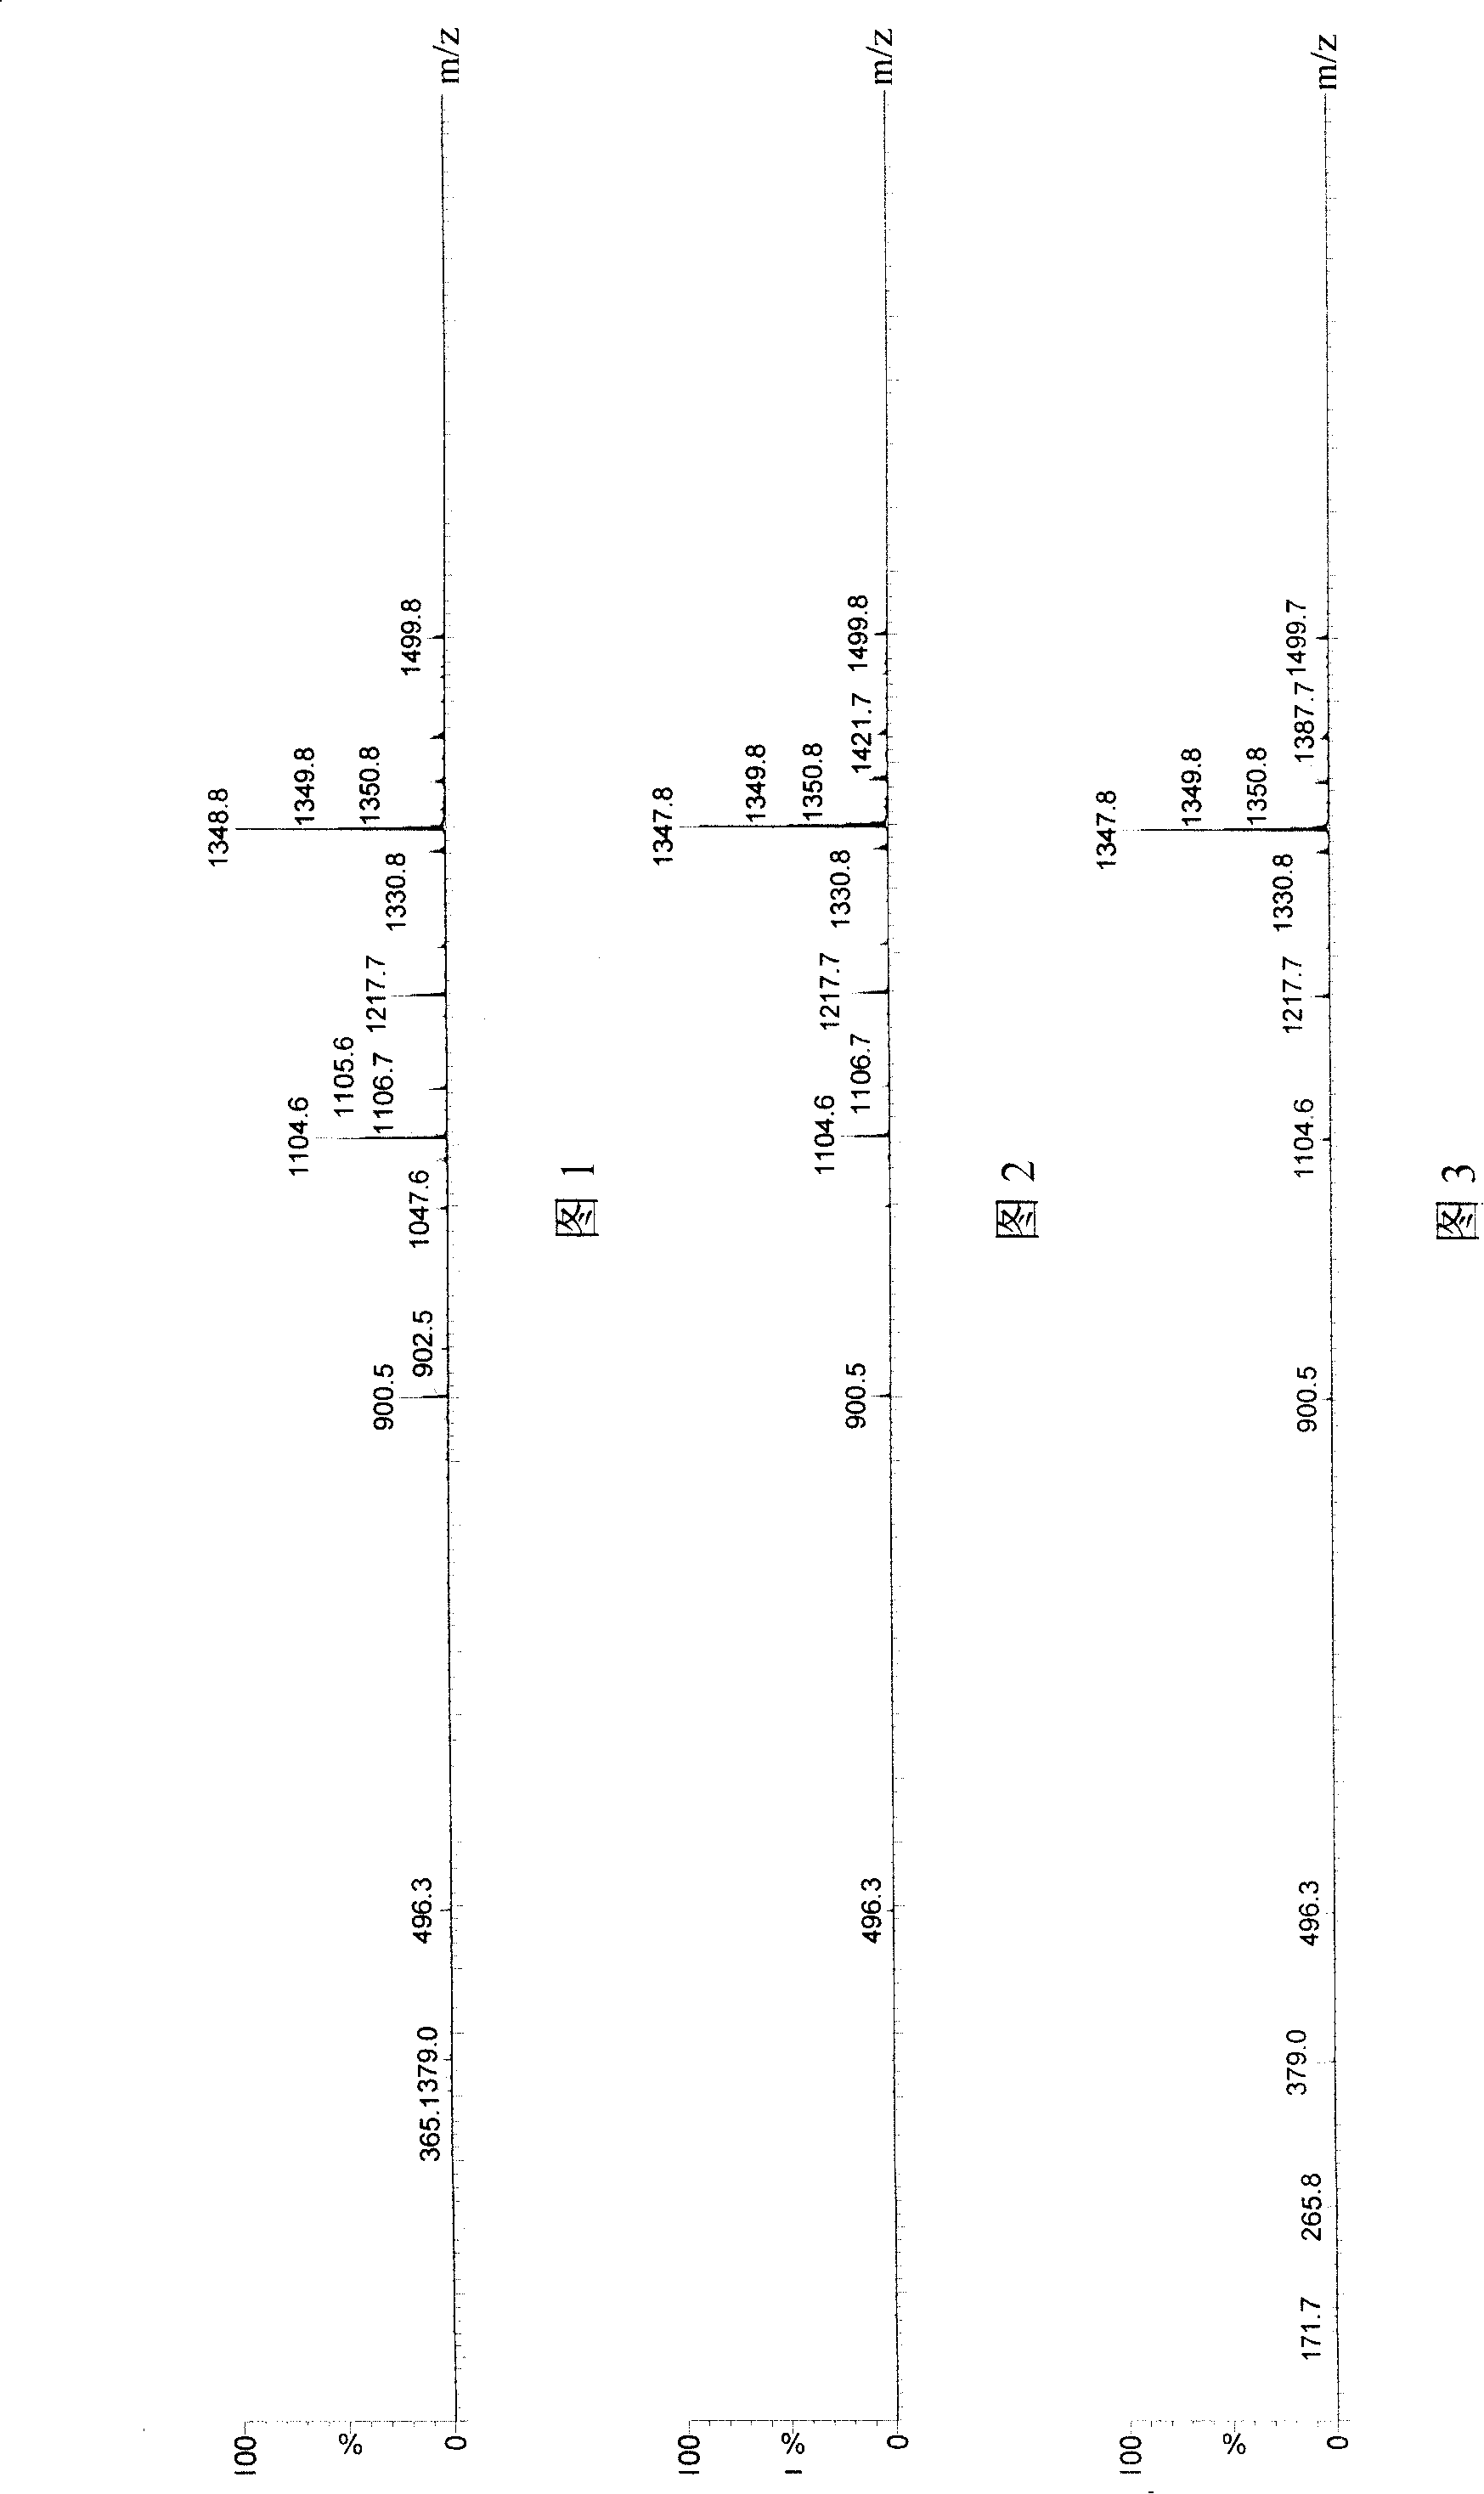 Application of cholinesterase in antagonistic tachykinin medicine